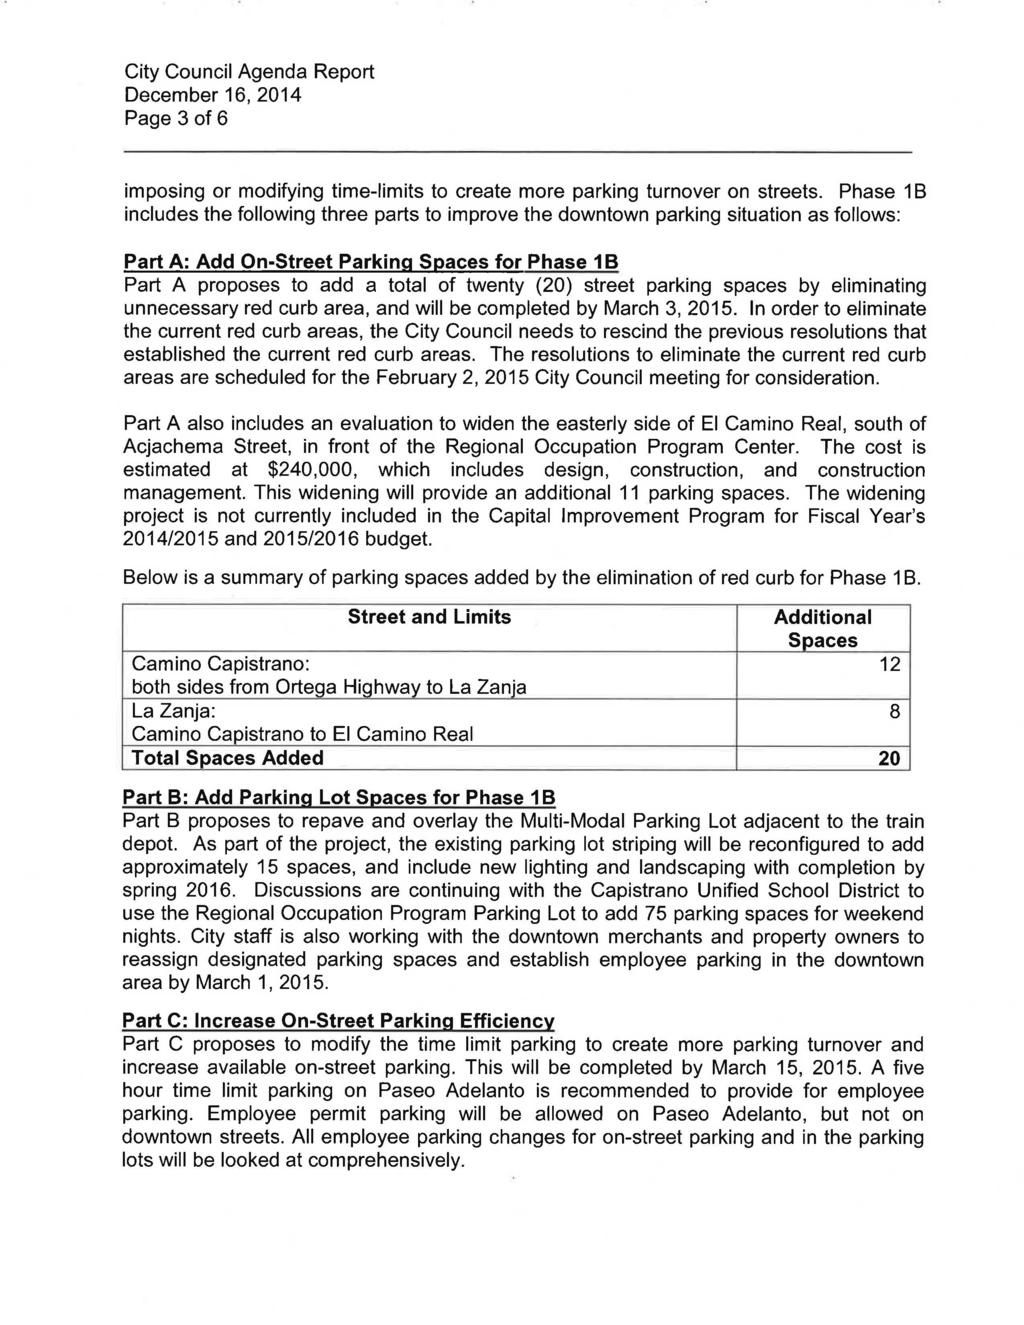 City Council Agenda Report Page 3 of 6 imposing or modifying time-limits to create more parking turnover on streets.